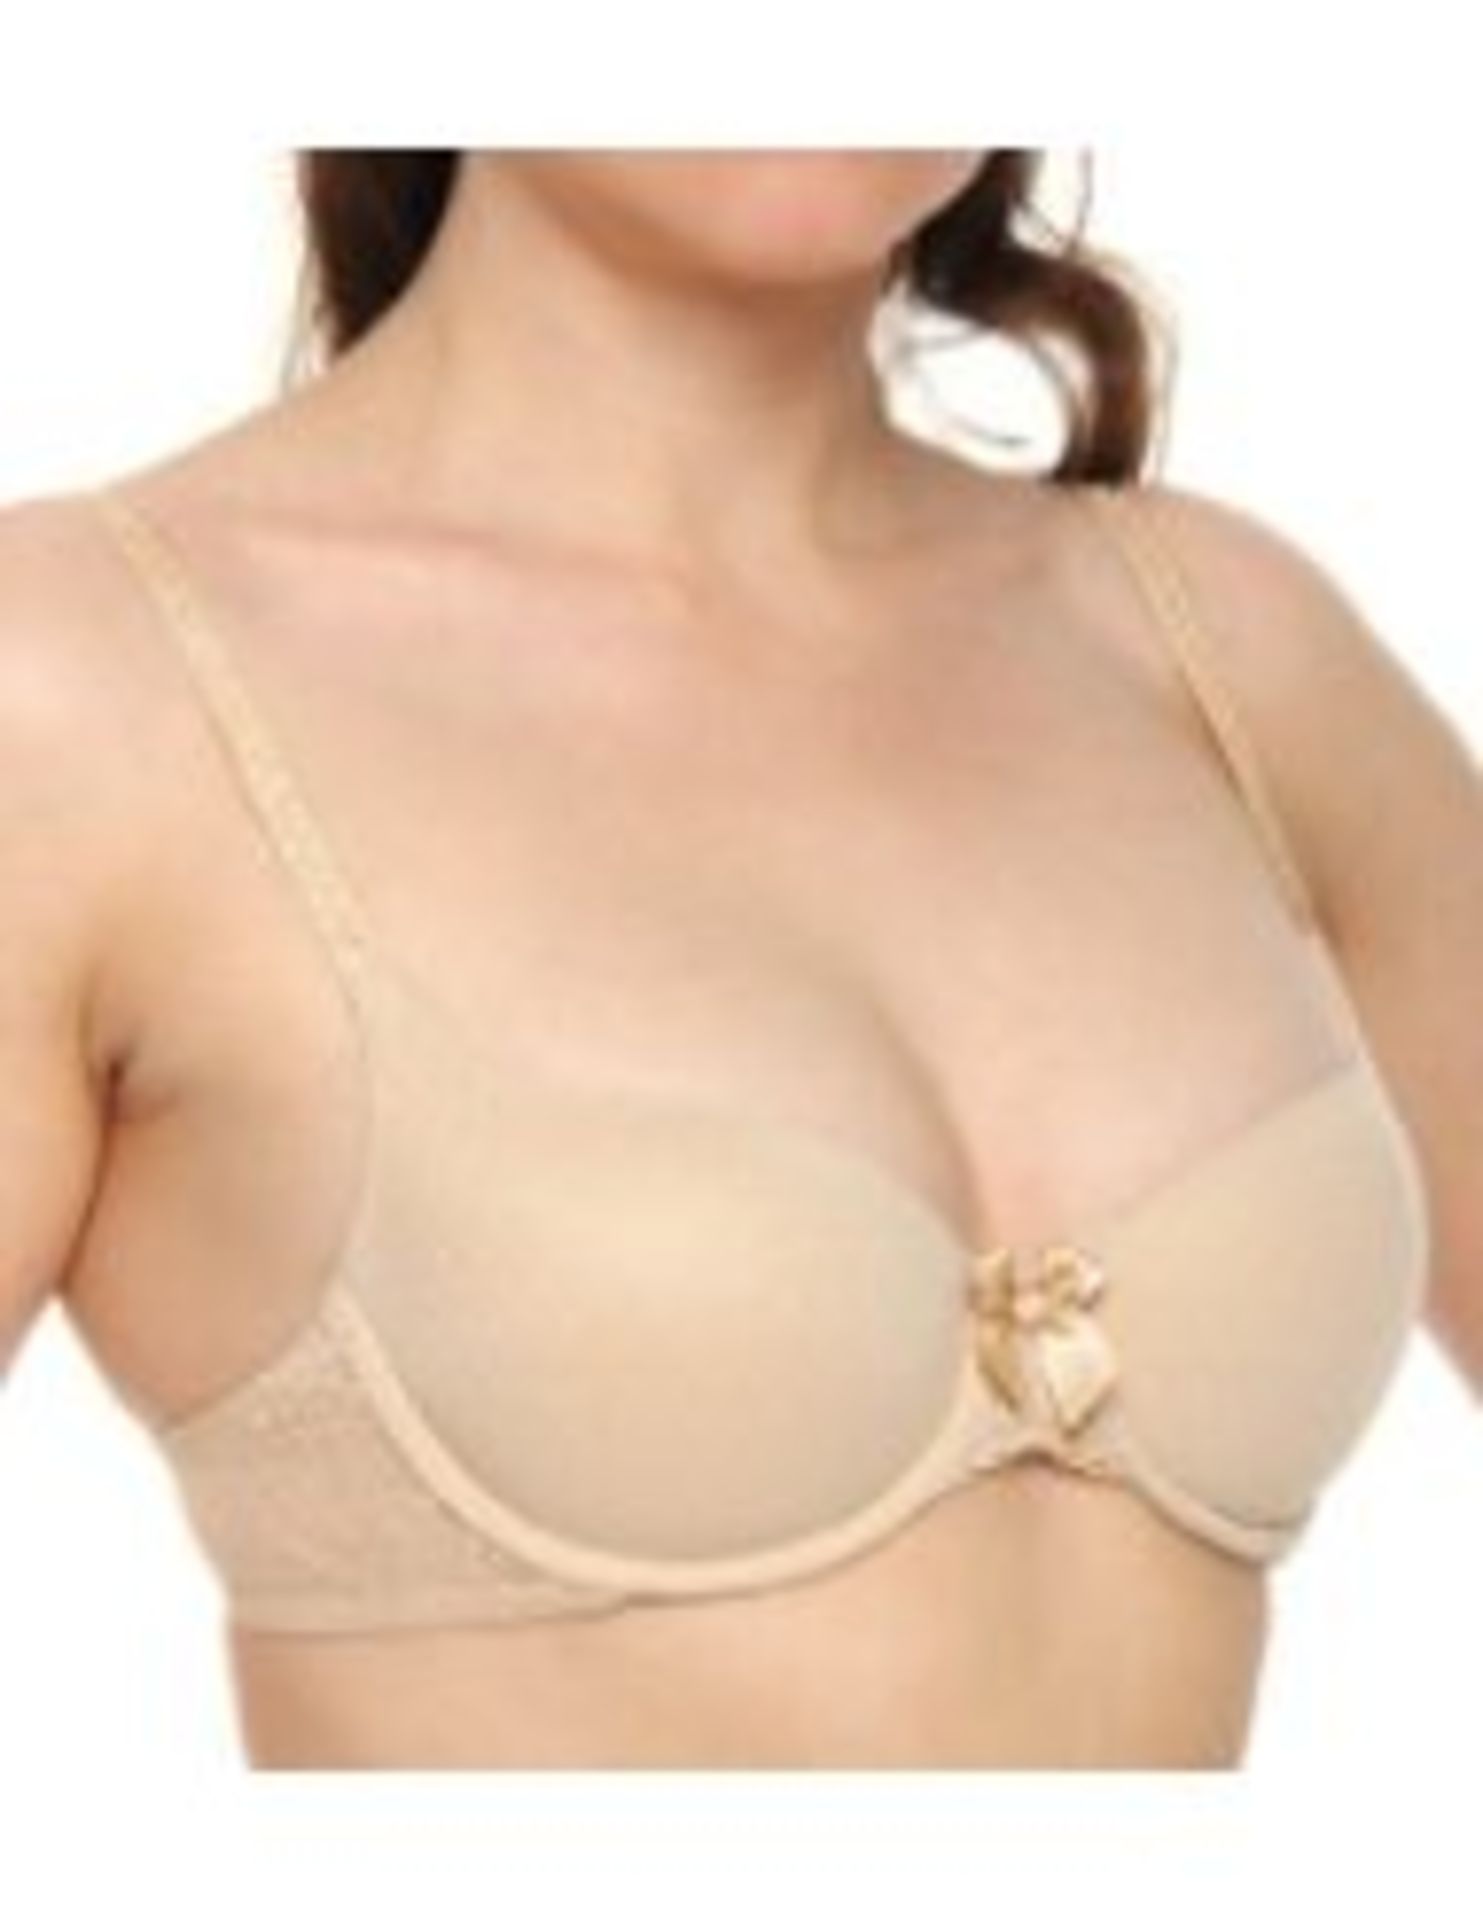 V  Grade A DKNY 34D Push-up Bra - nude colour with lace bow and trim MSRP $42.00 (photograph